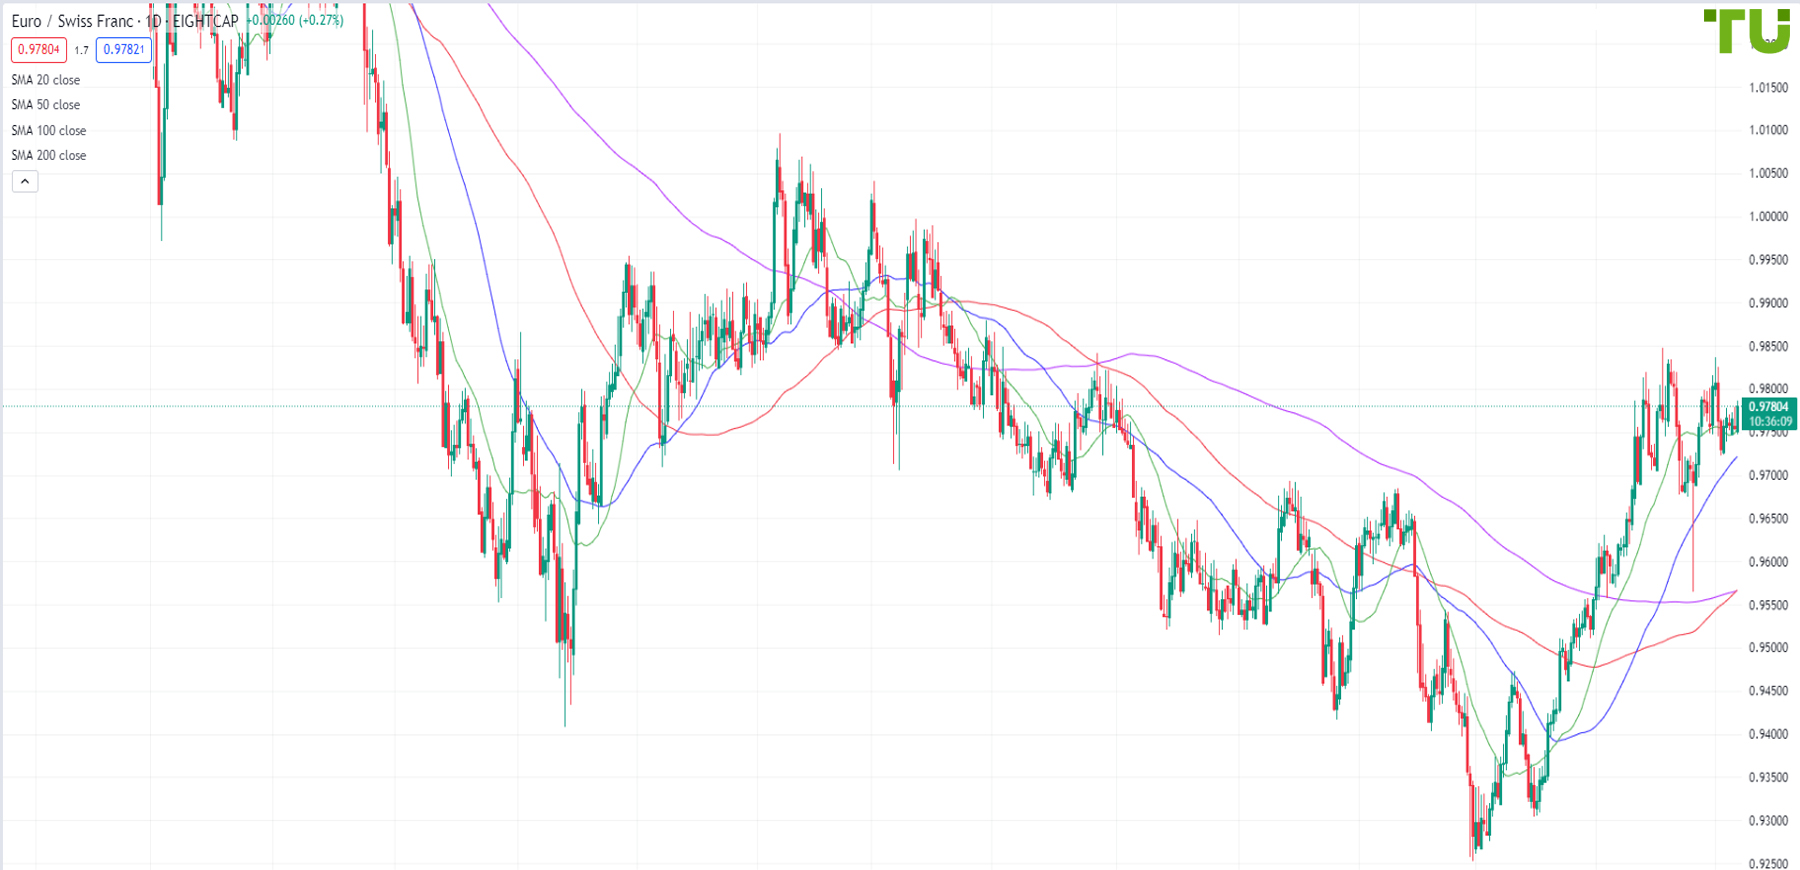 EUR/CHF is advancing higher